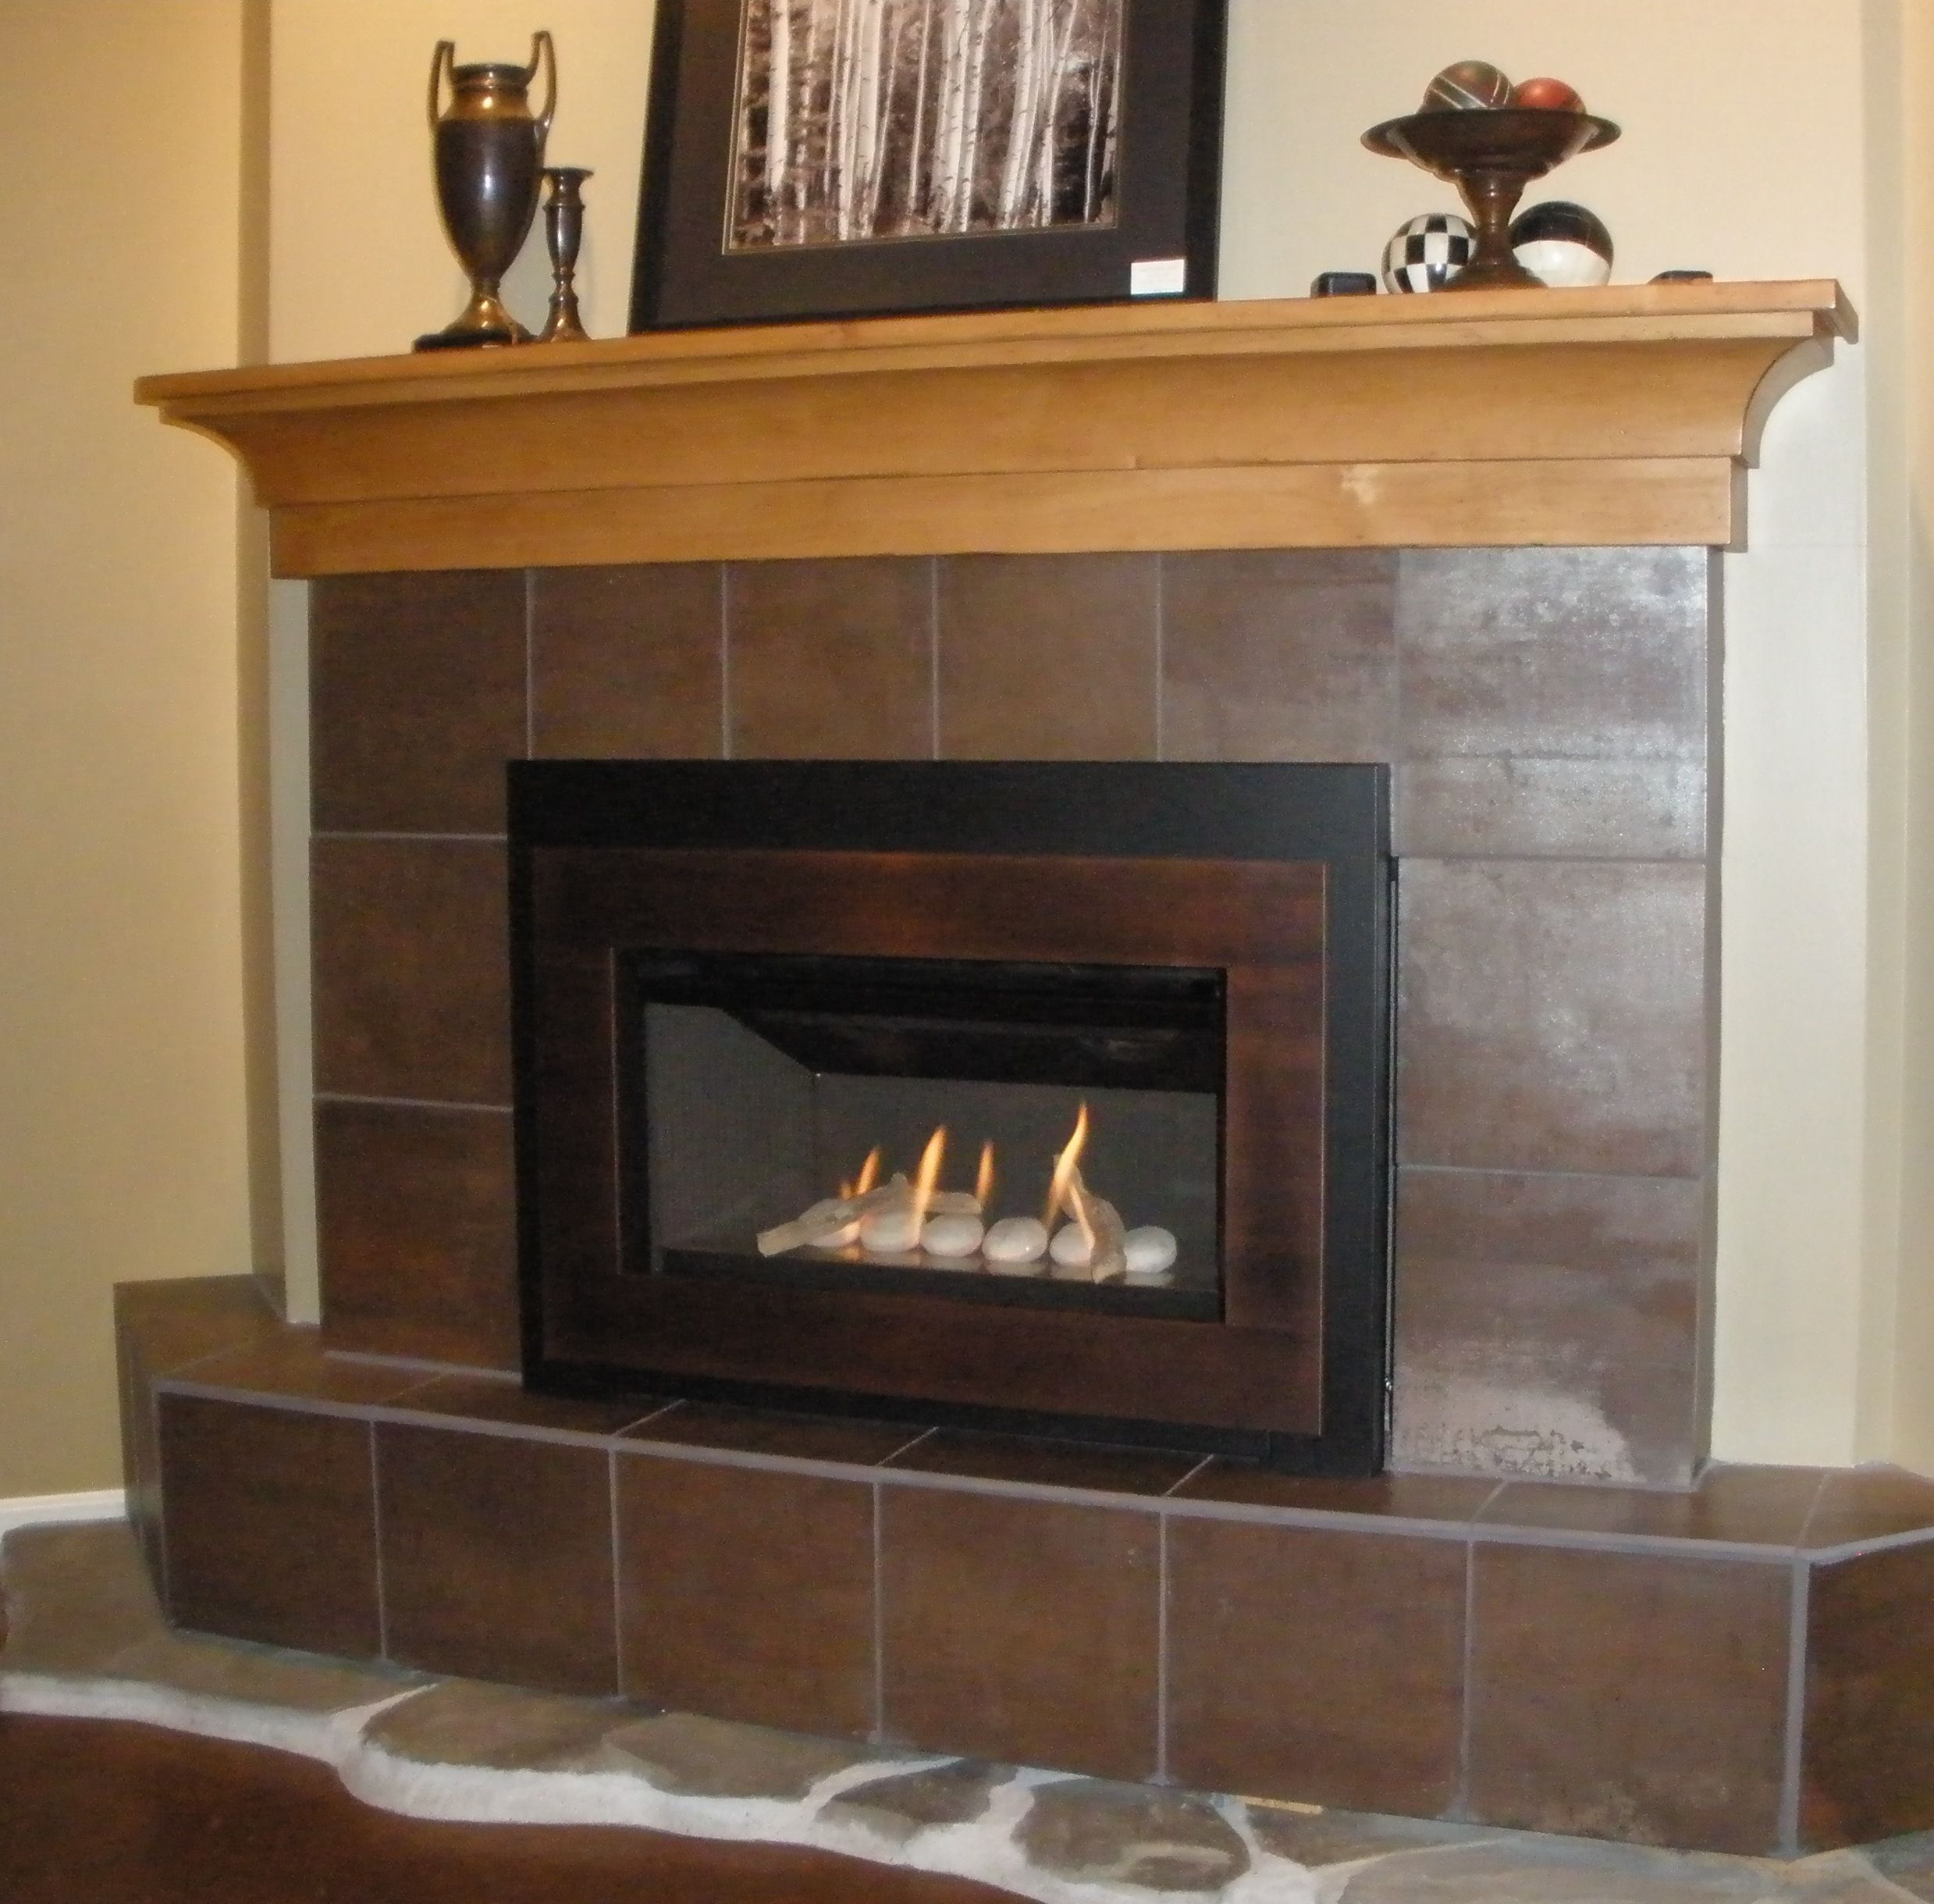 Churchill Fireplace Lovely Pin On Valor Radiant Gas Fireplaces Midwest Dealer